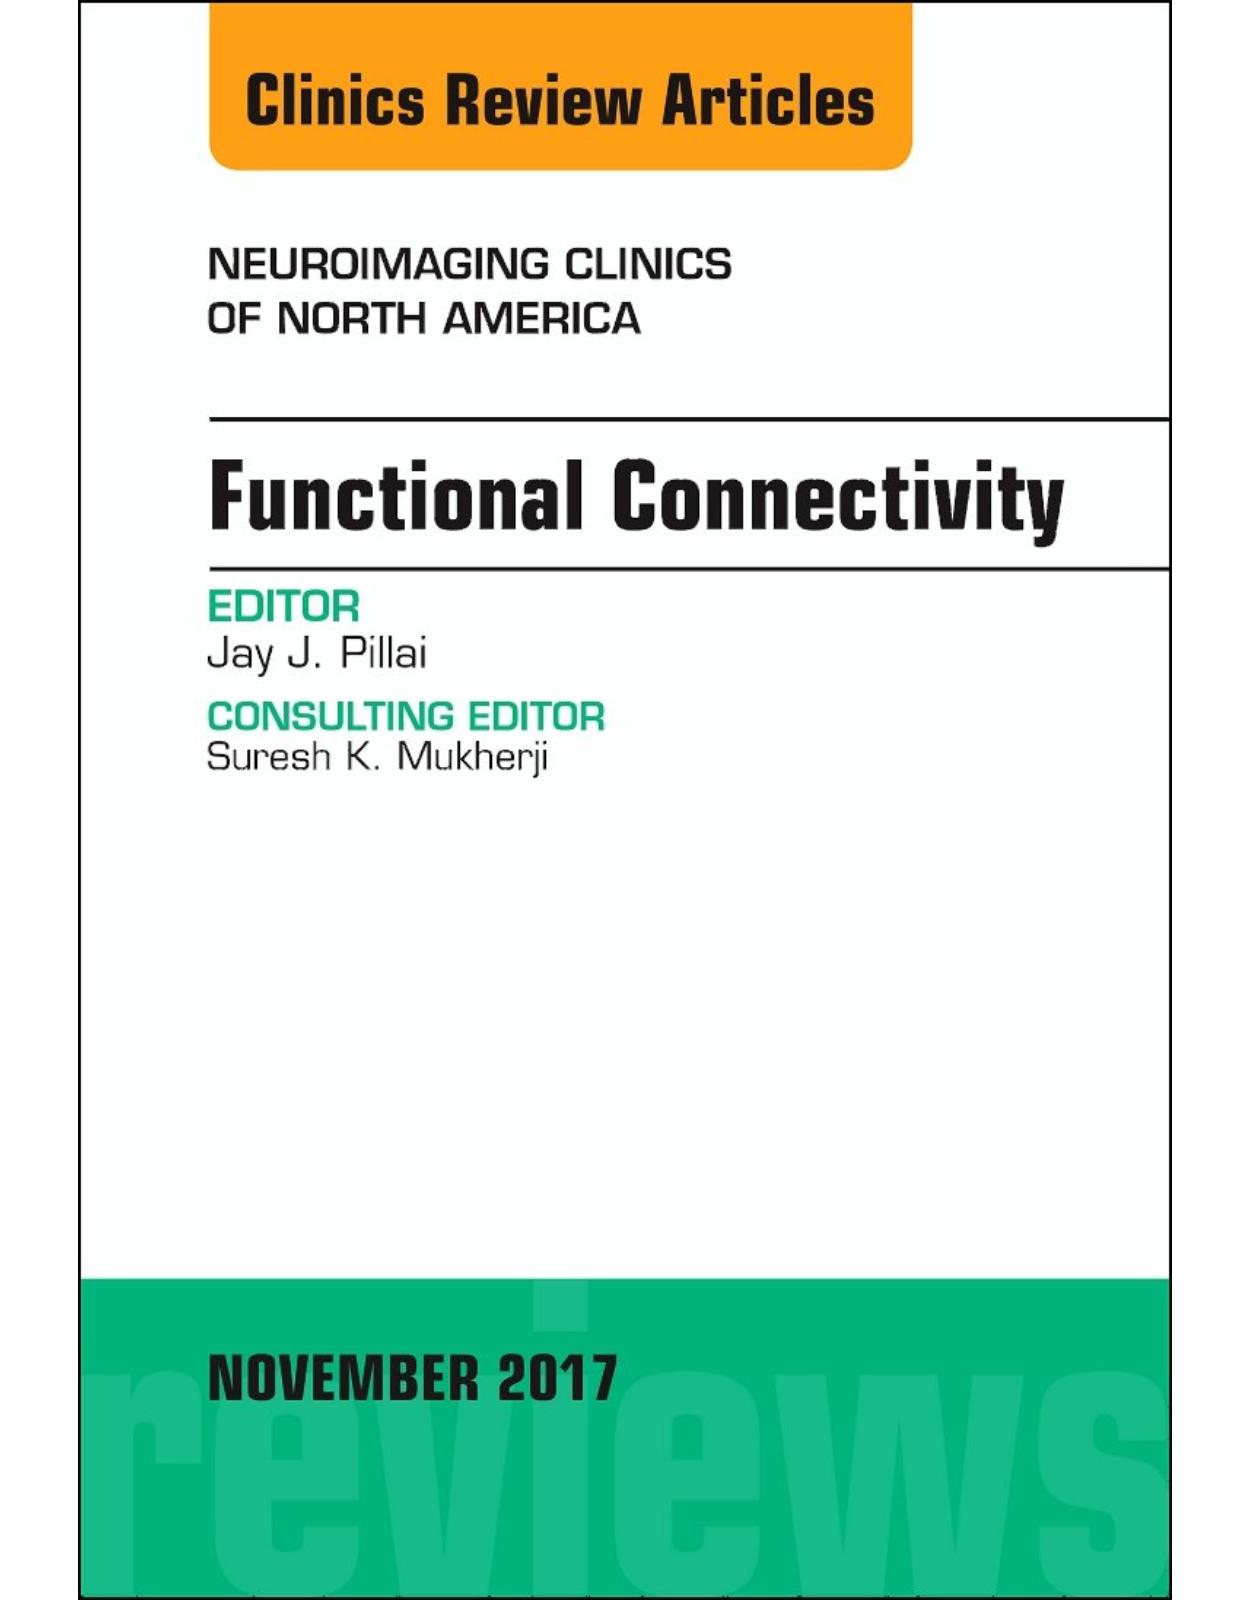 Functional Connectivity, An Issue of Neuroimaging Clinics of North America, Volume 27-4